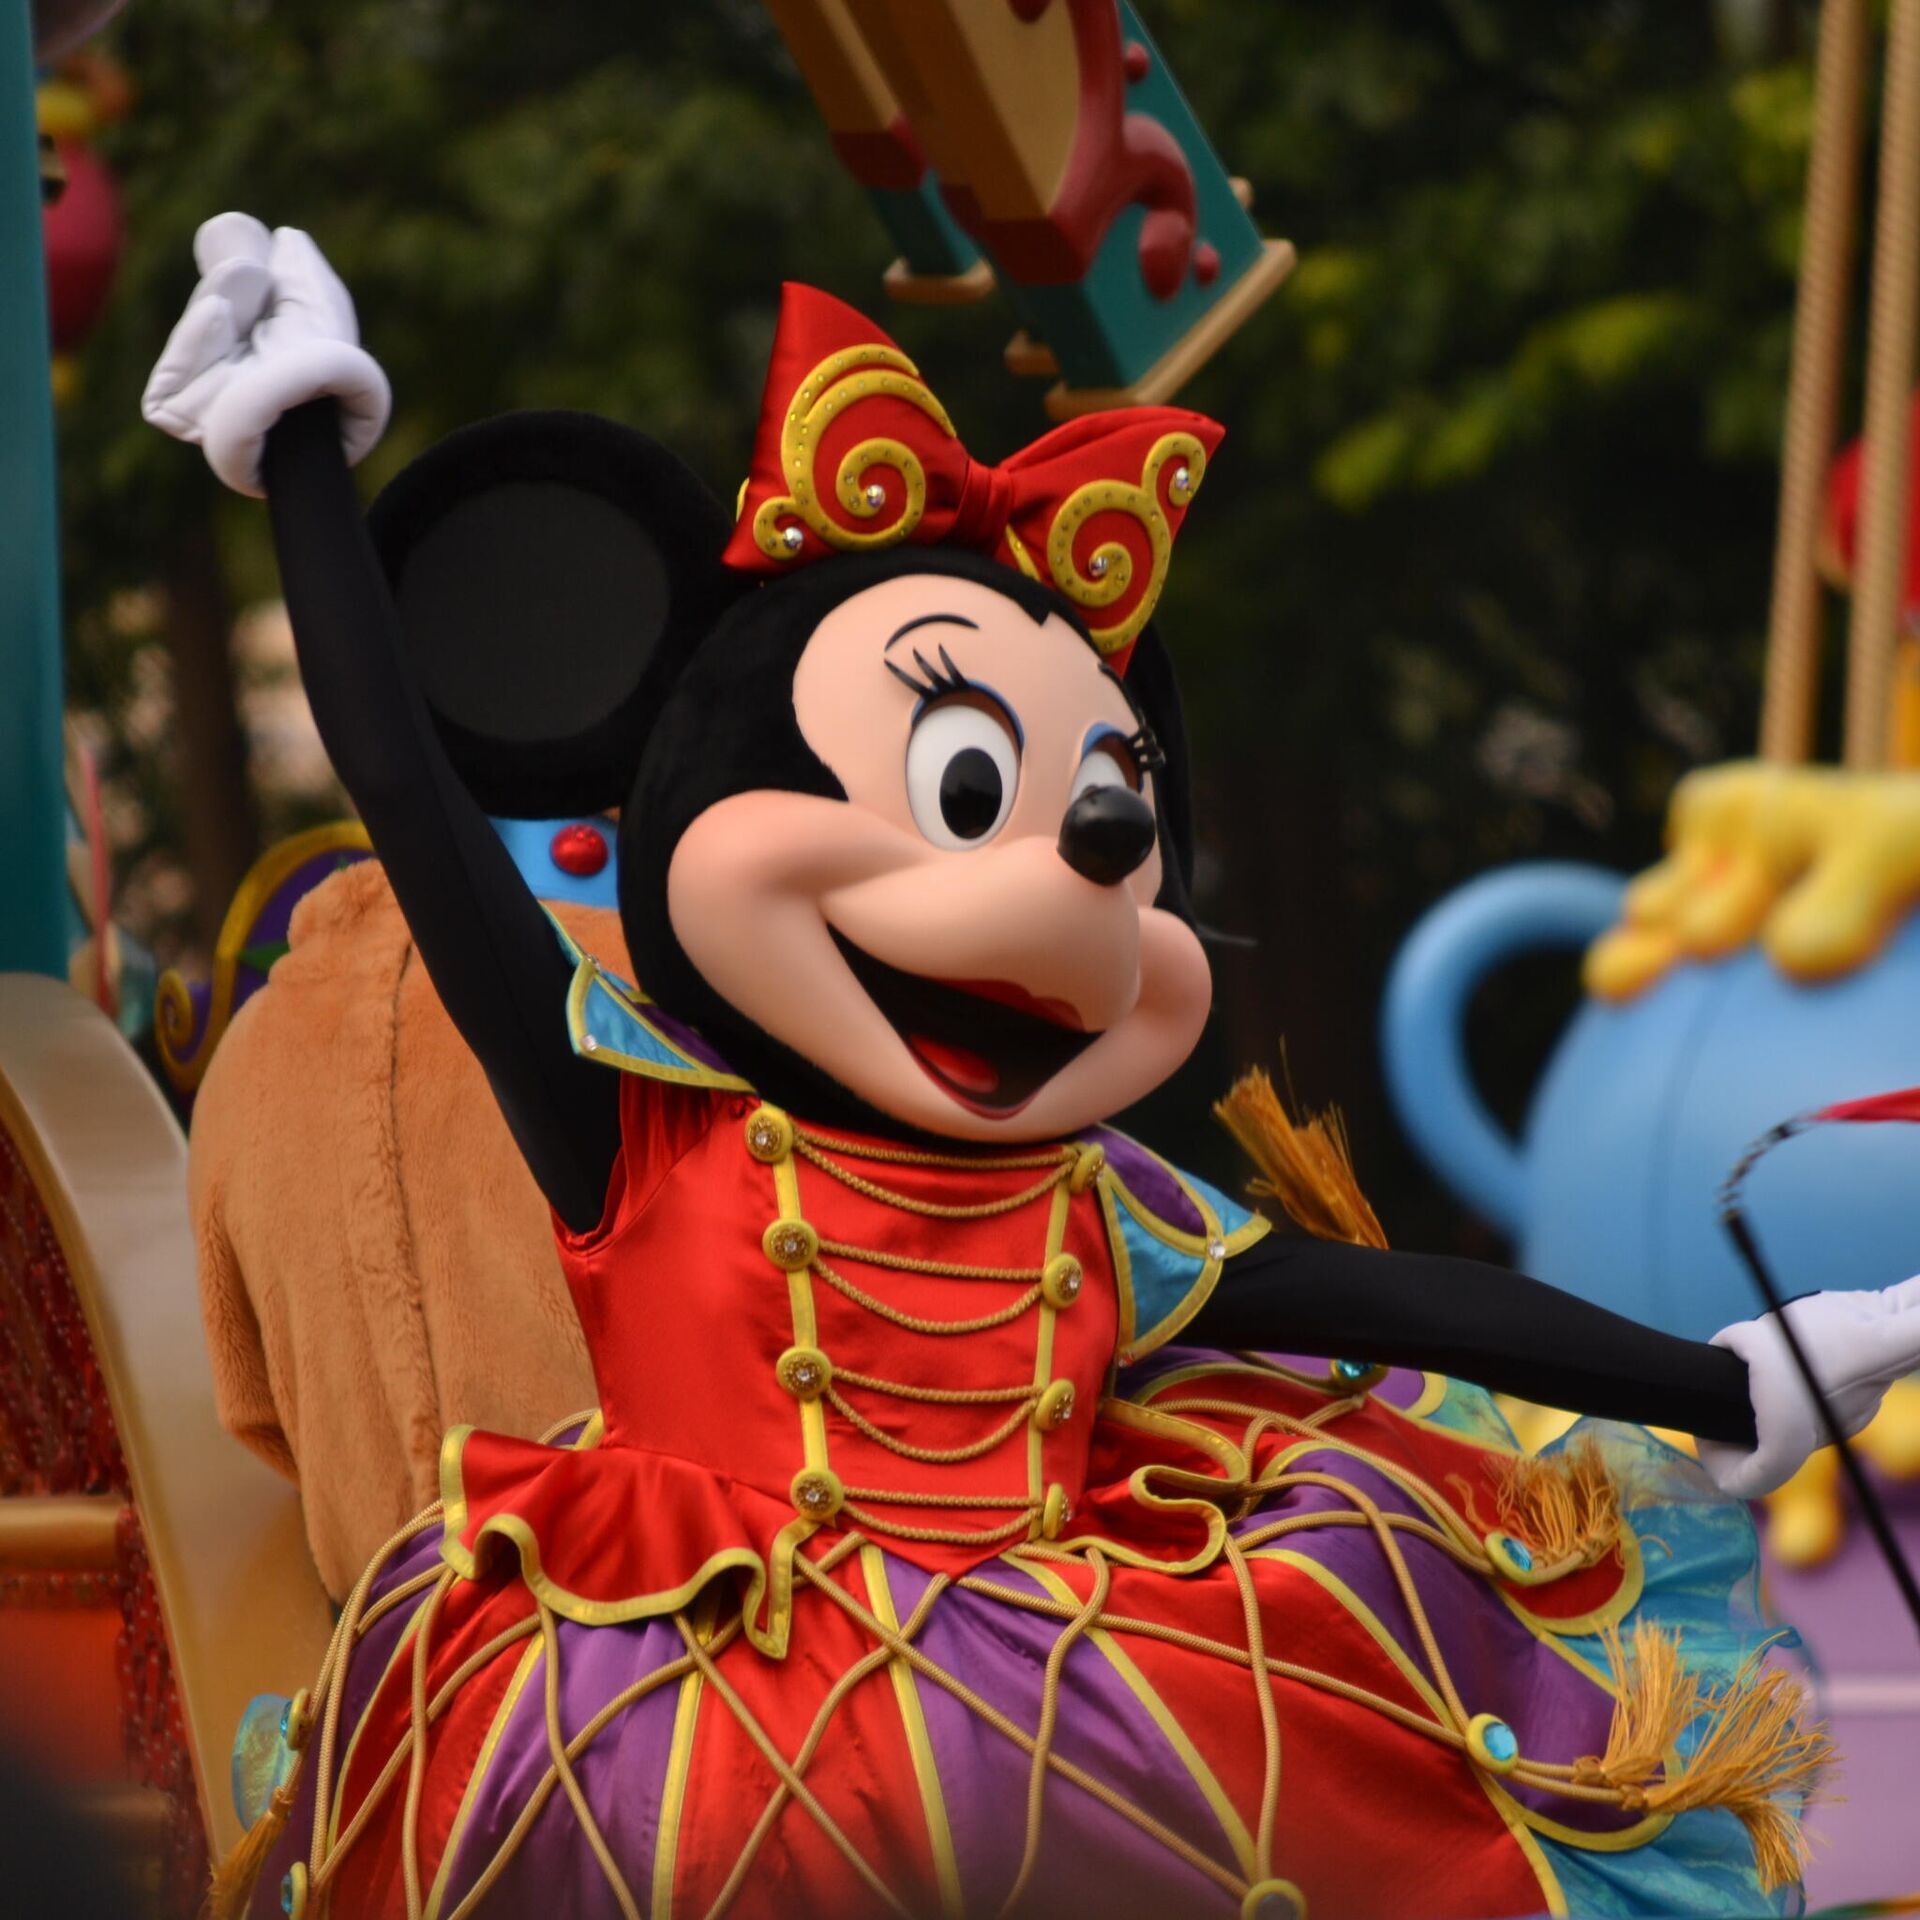 Minnie Mouse To Wear Pantsuit for Disneyland Paris' 30th Anniversary,  minnie mouse